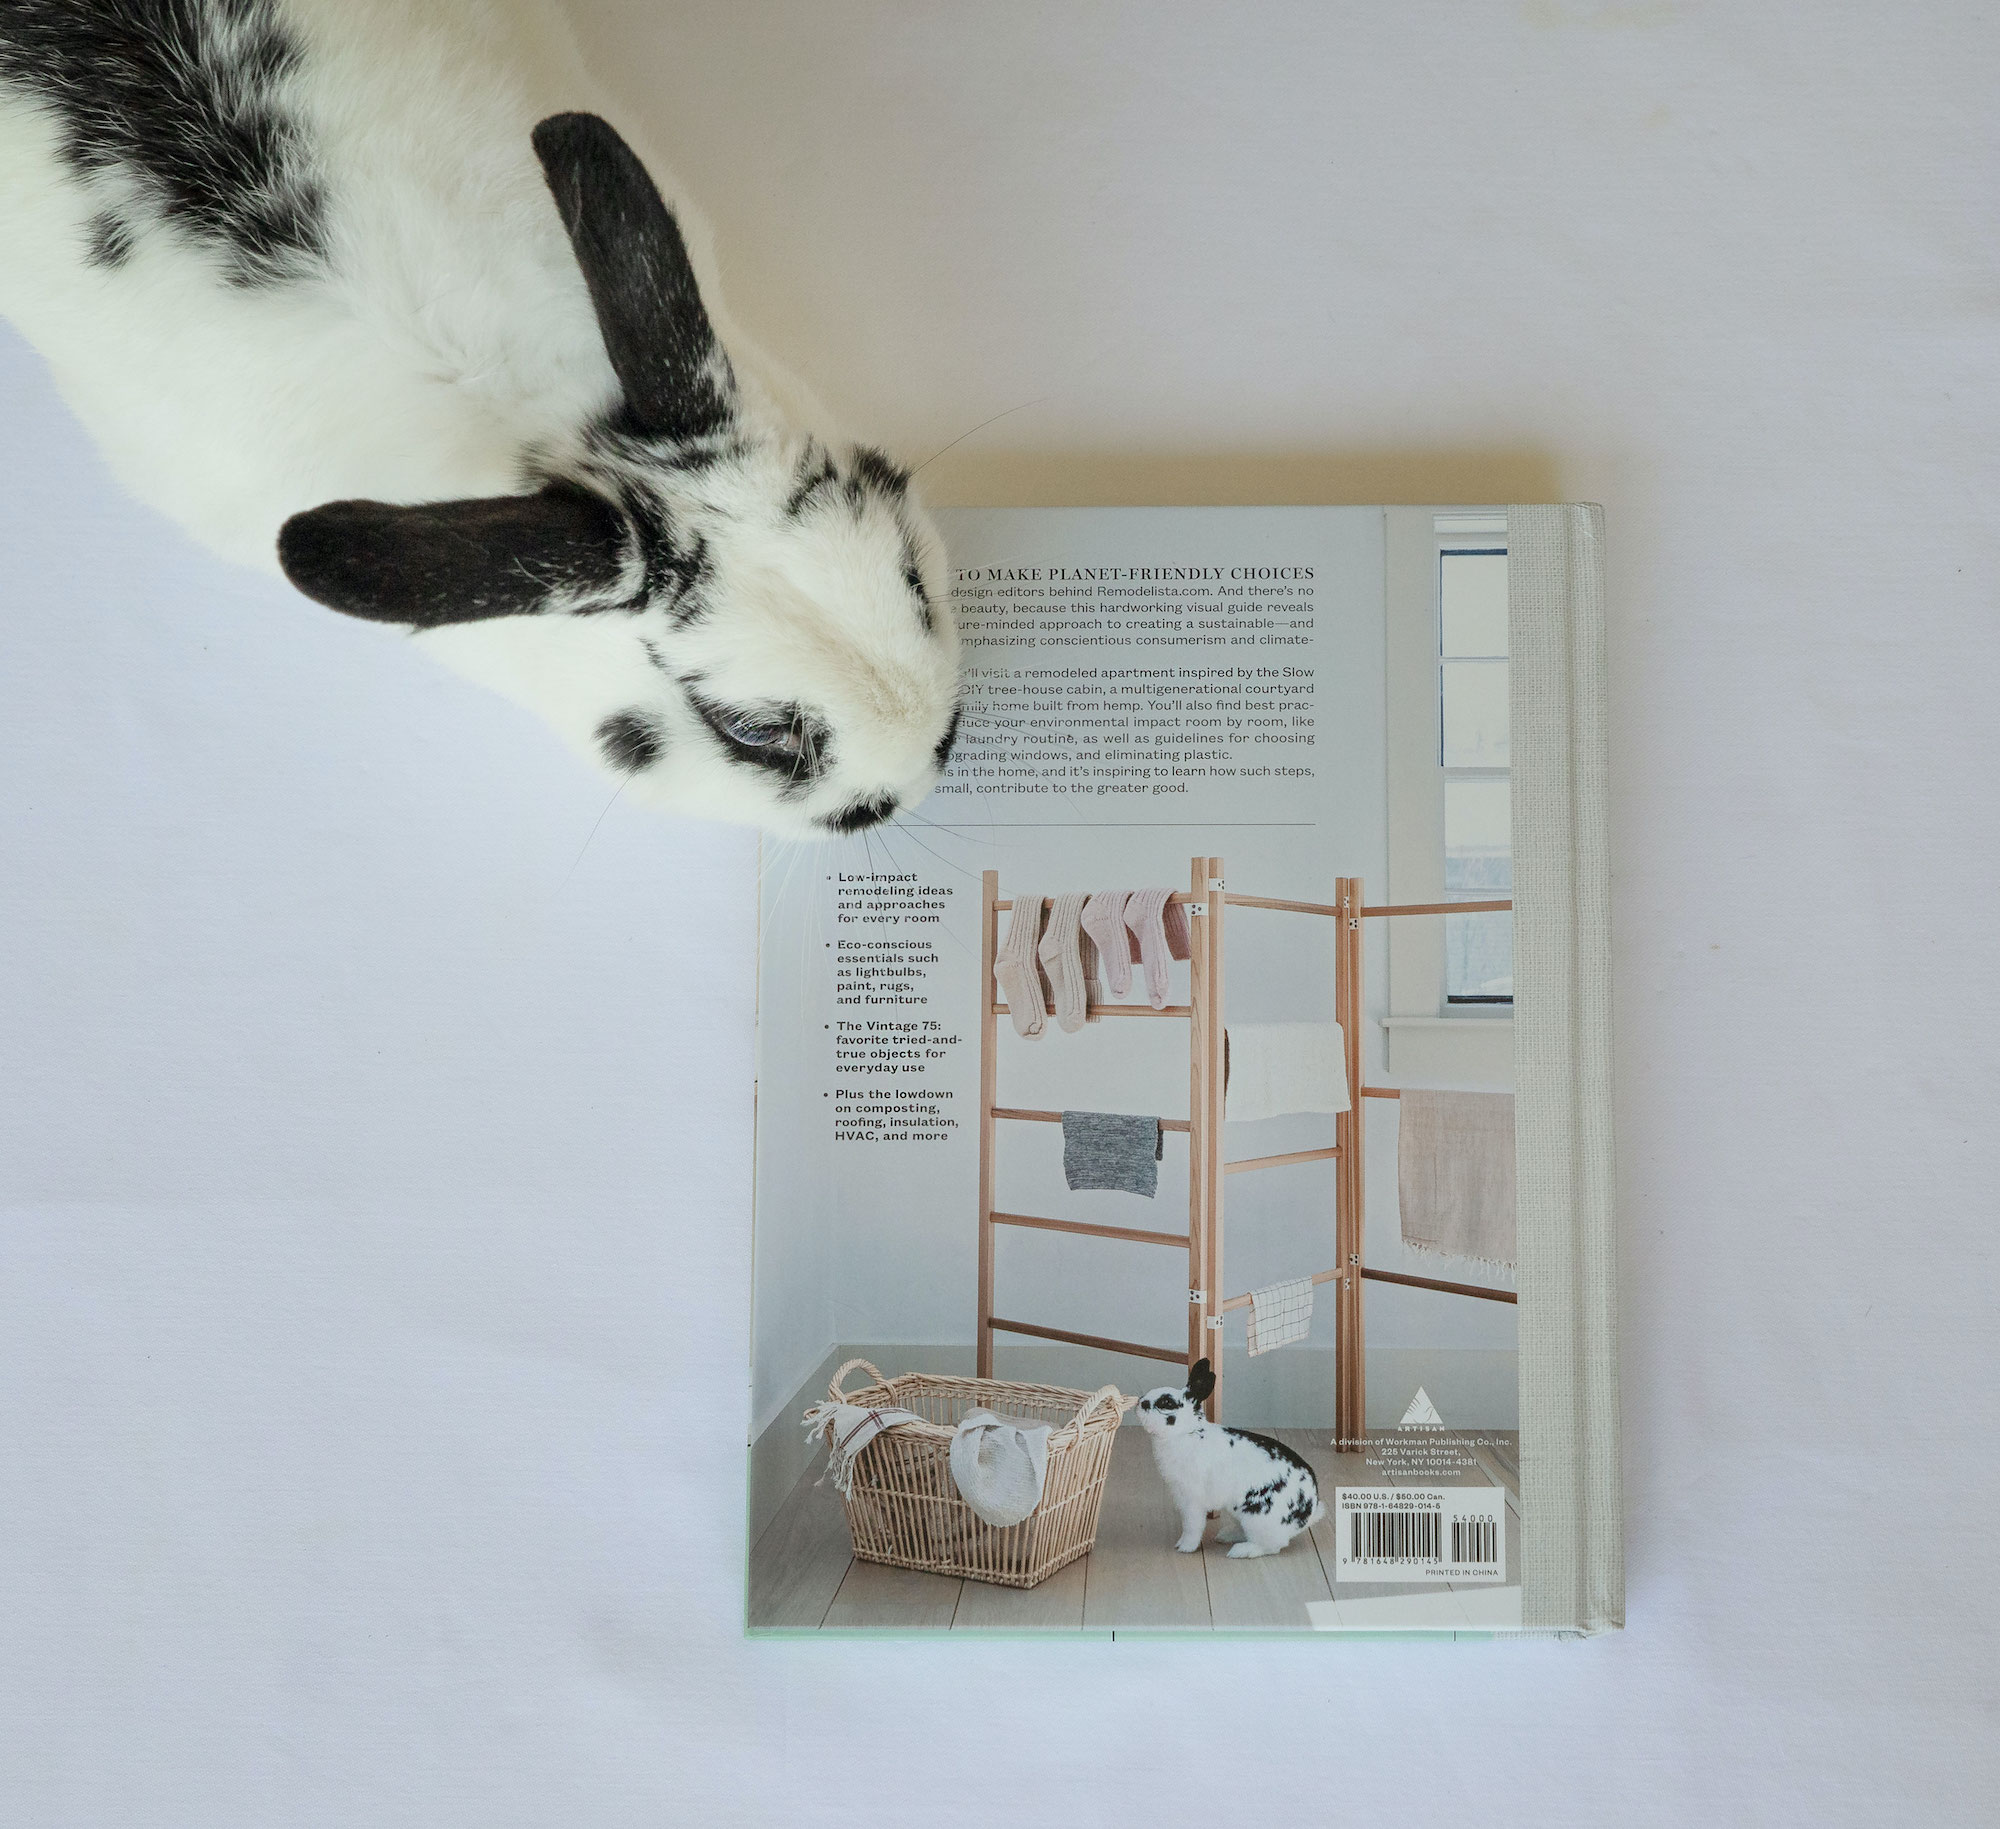 Remodelista: The Low-Impact Home: Our Latest Book, Available for Pre-Order  - Remodelista